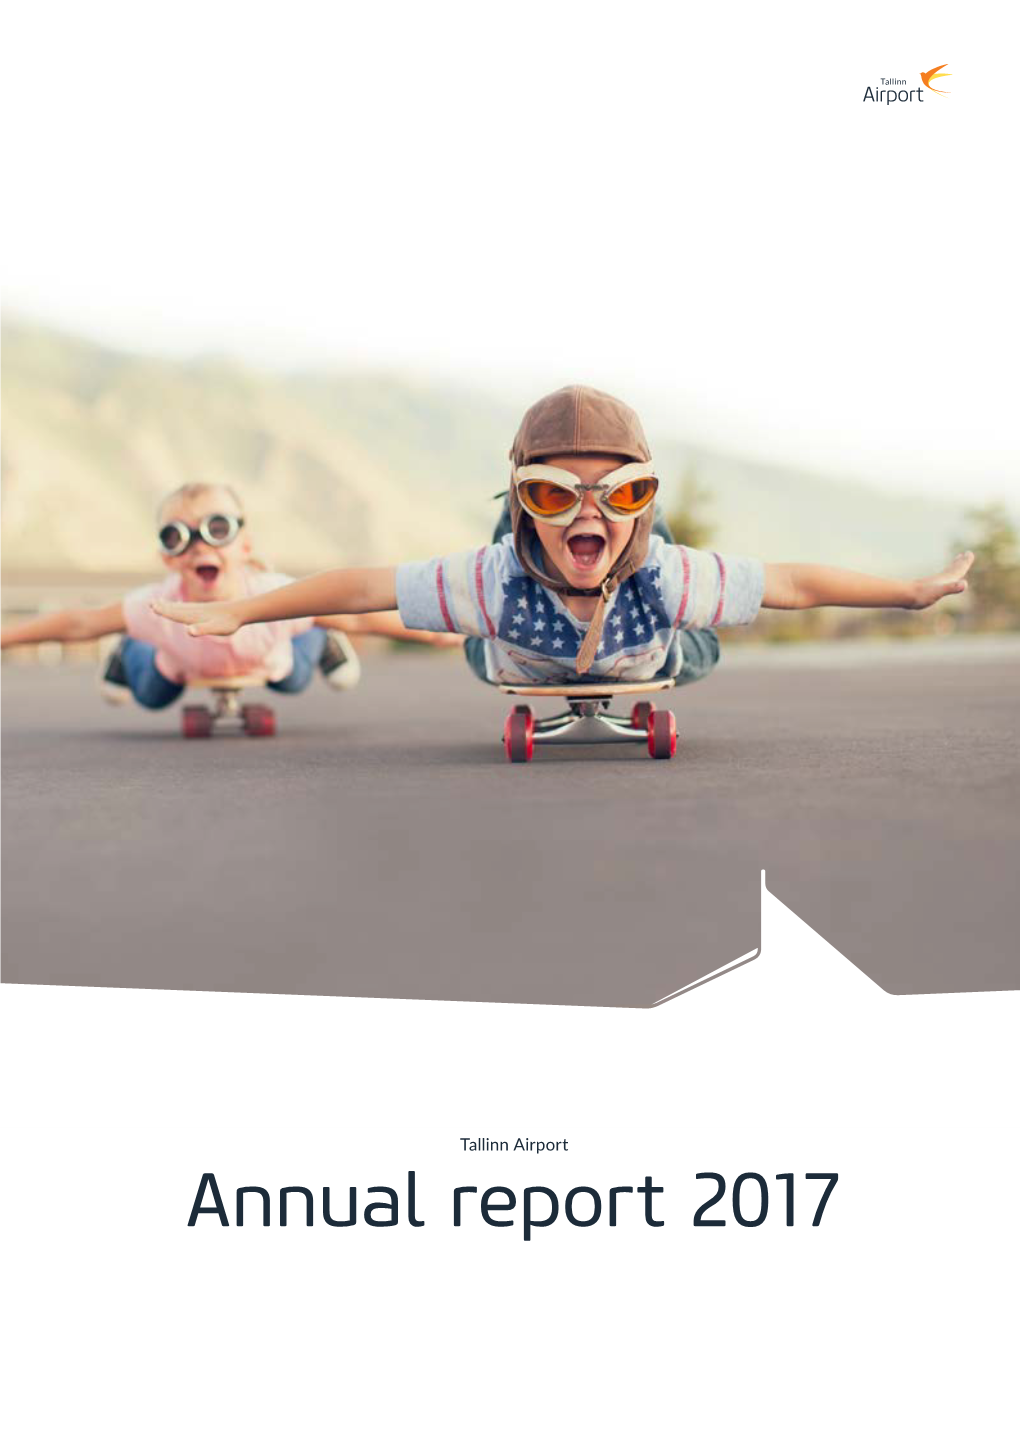 Annual Report 2017 2017 New VIP and Security Con- Trol Area Were Completed